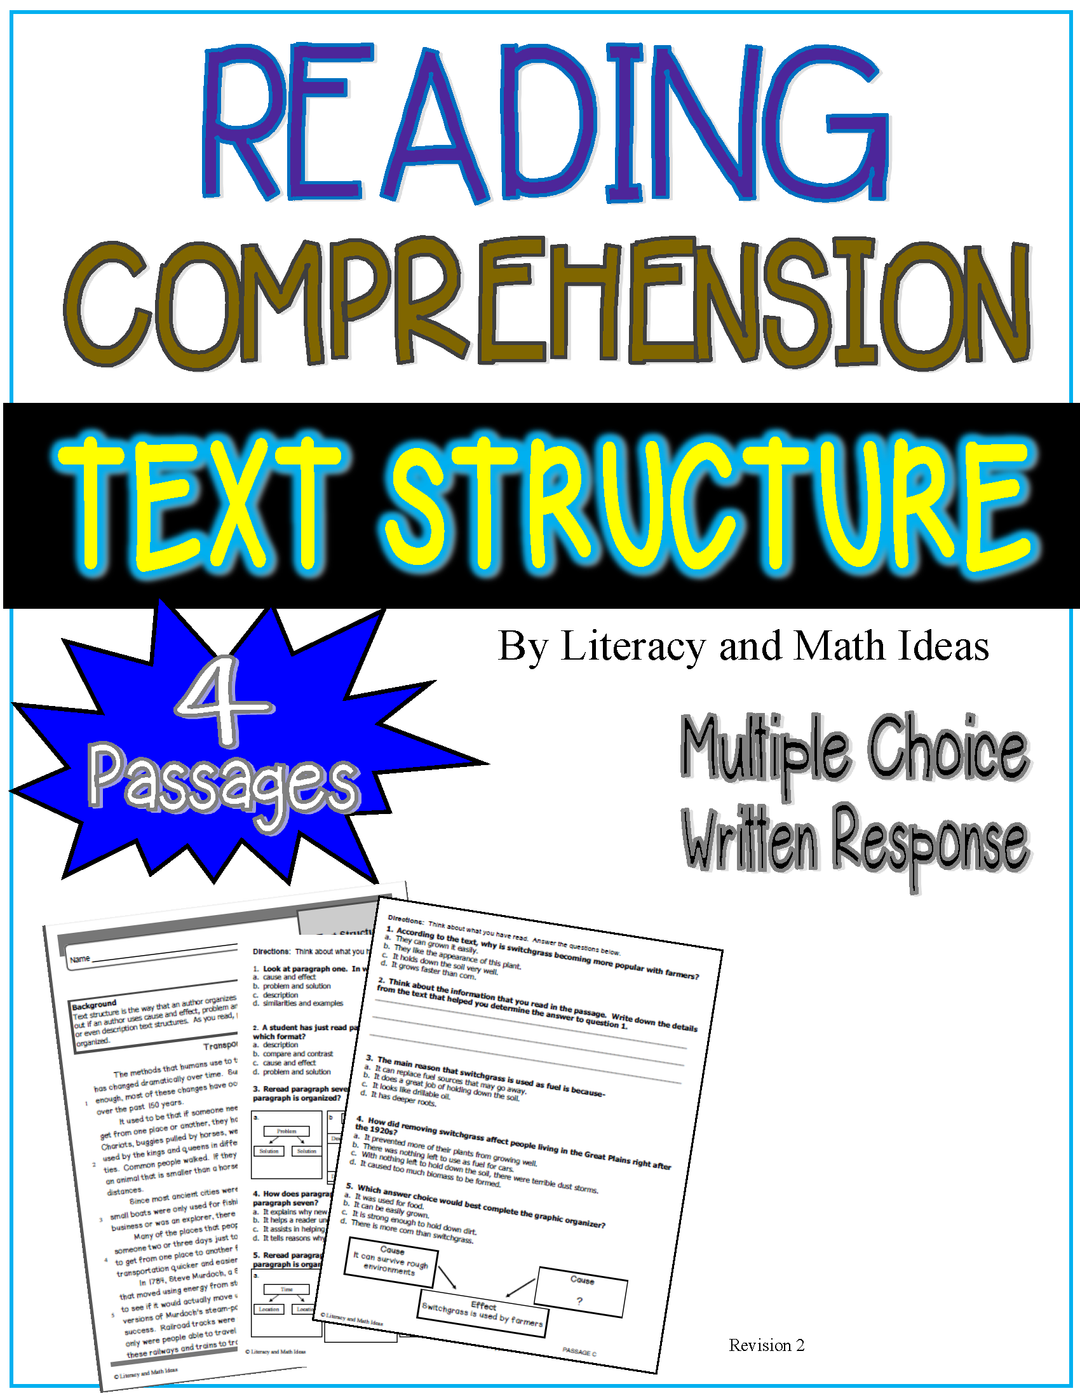 Reading Comprehension: Text Structure